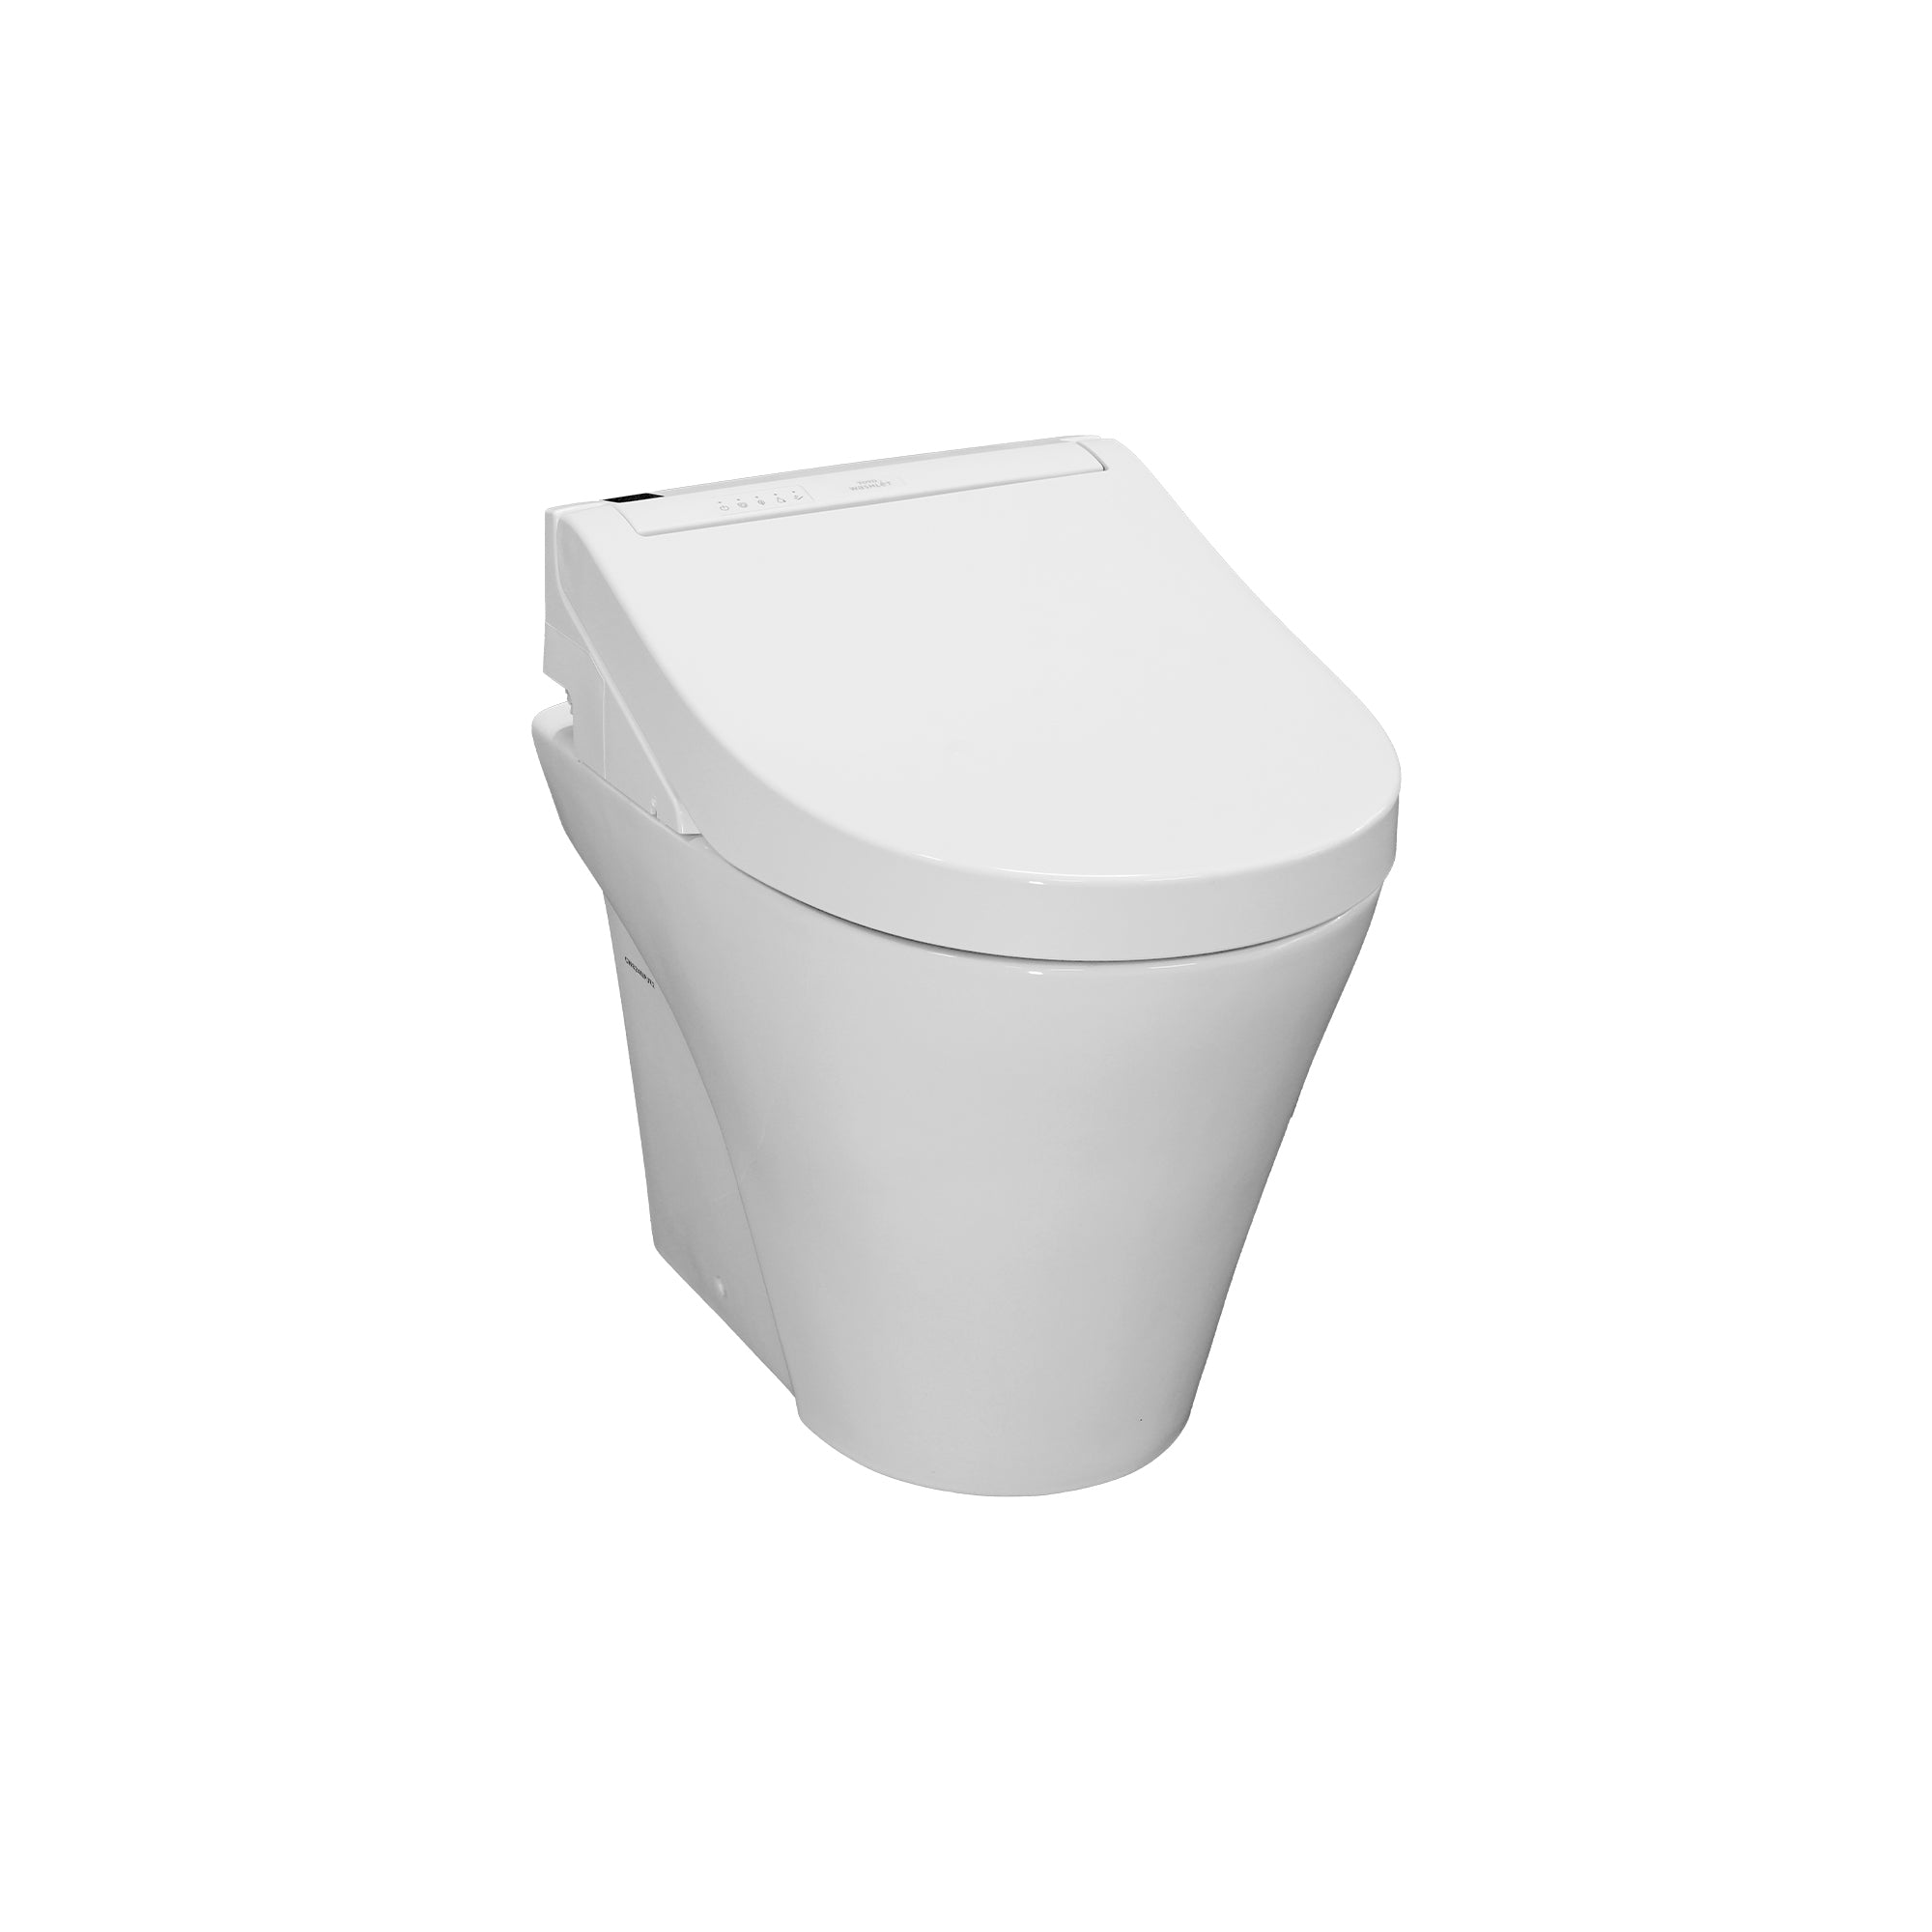 TOTO AVANTE WALL FACED TOILET AND C5 WASHLET W/ REMOTE CONTROL (ROUND) GLOSS WHITE